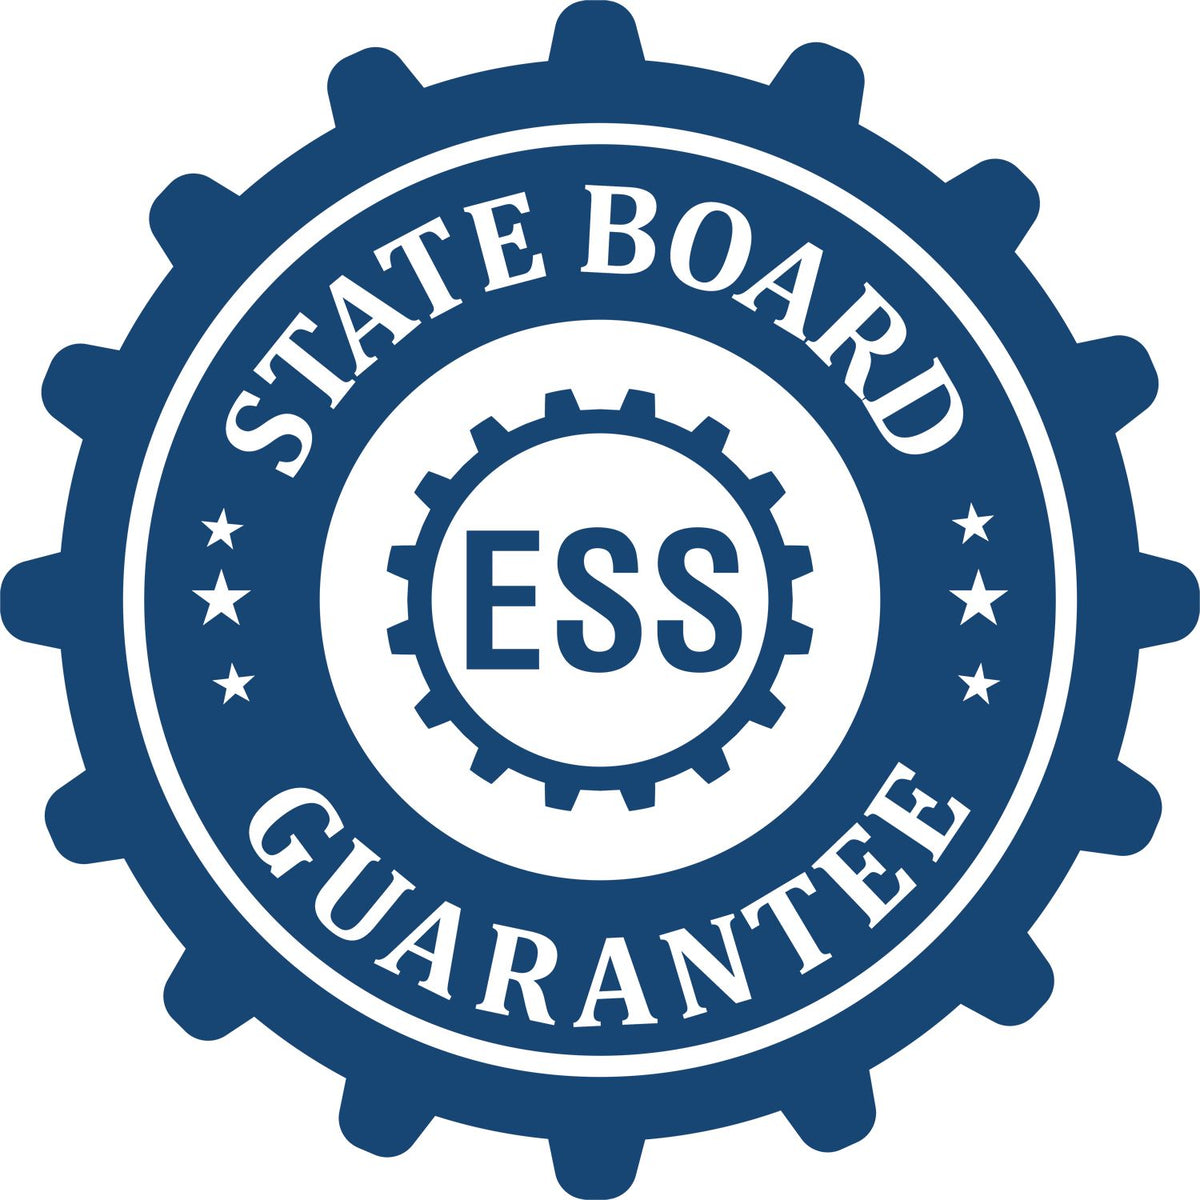 An emblem in a gear shape illustrating a state board guarantee for the Heavy-Duty Massachusetts Rectangular Notary Stamp product.